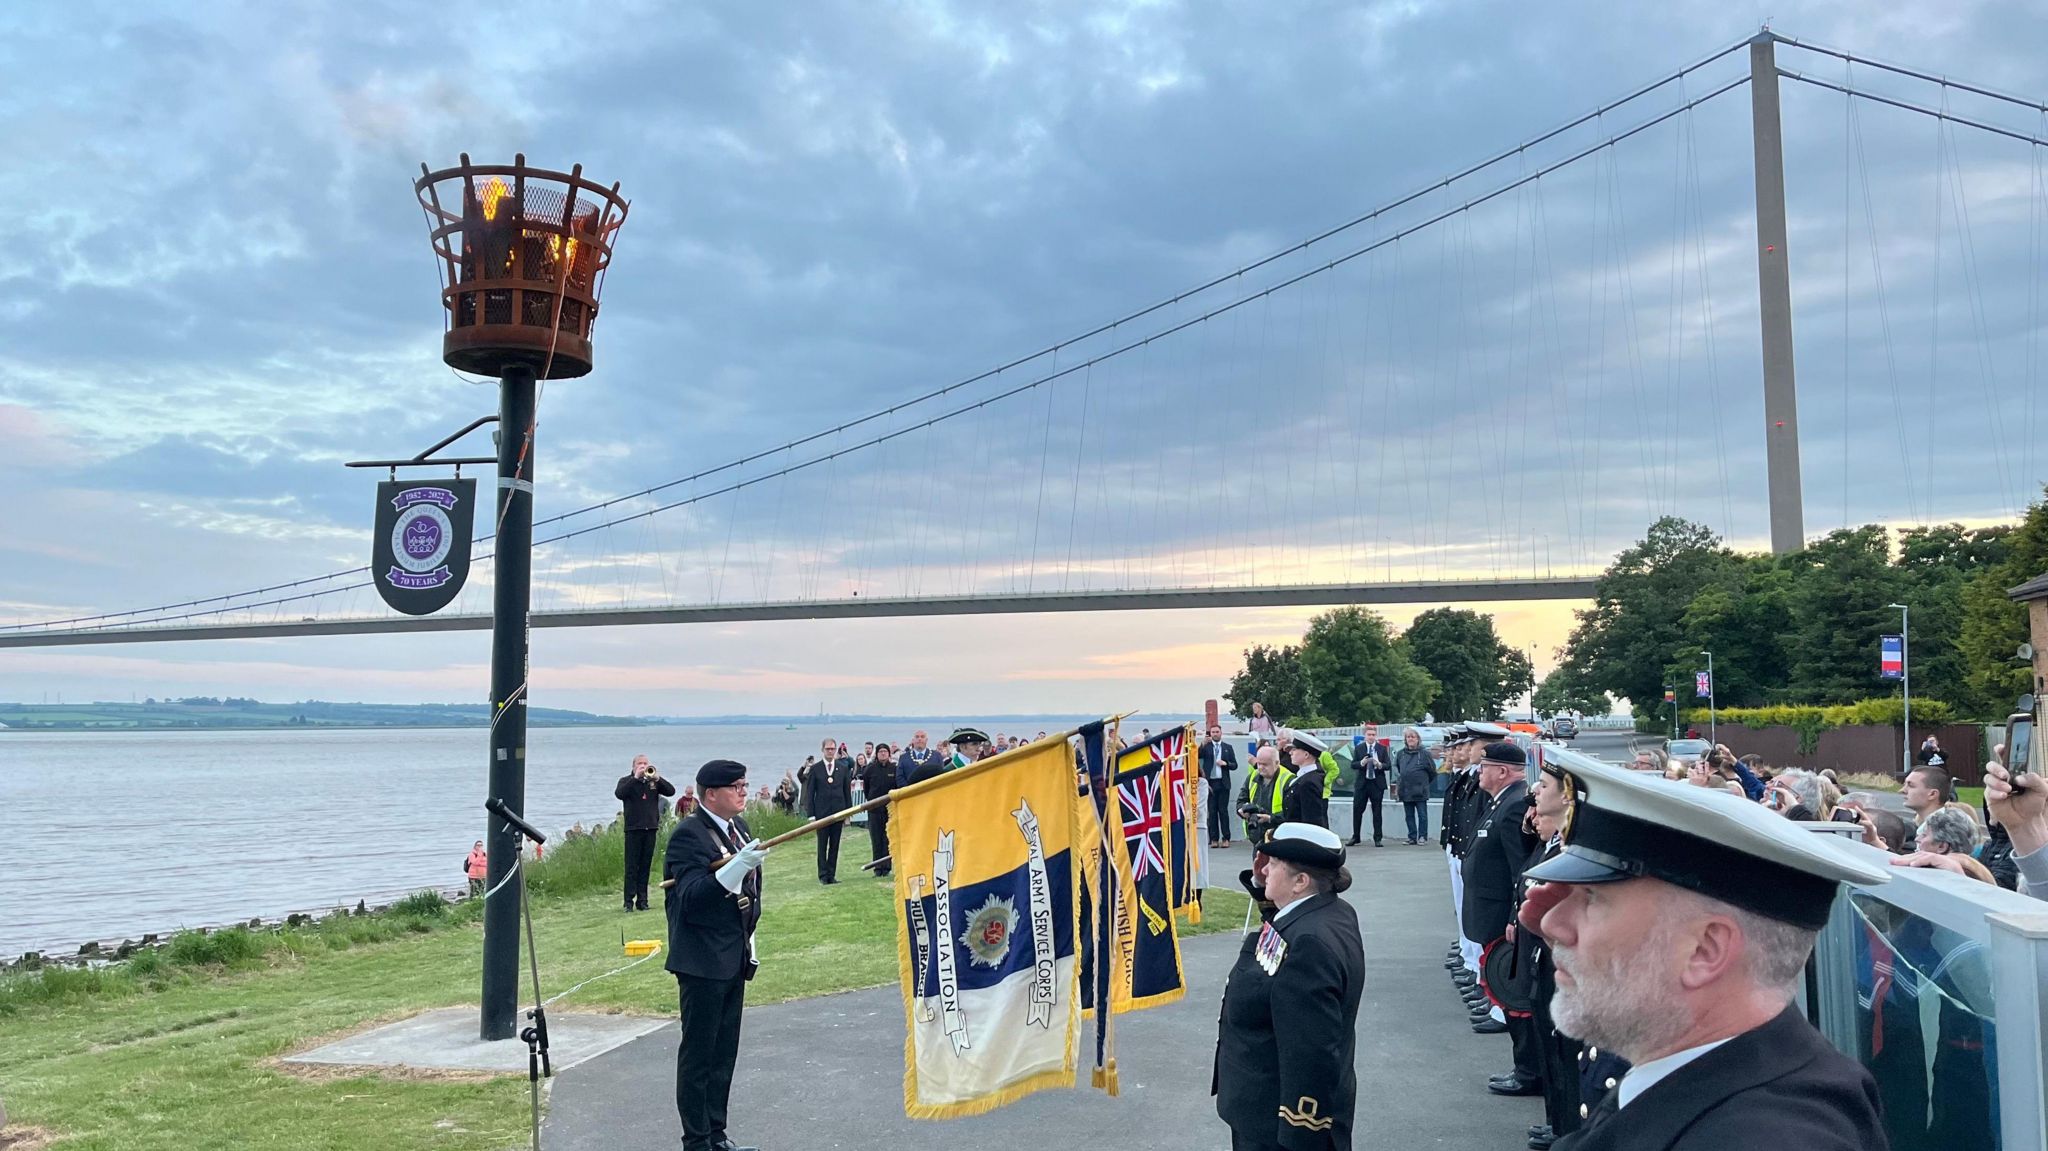 Members of the armed forces, sea cadets and local residents gathered at the Hessle Foreshore to watch the beacon being lit to commemorate the D-Day landings